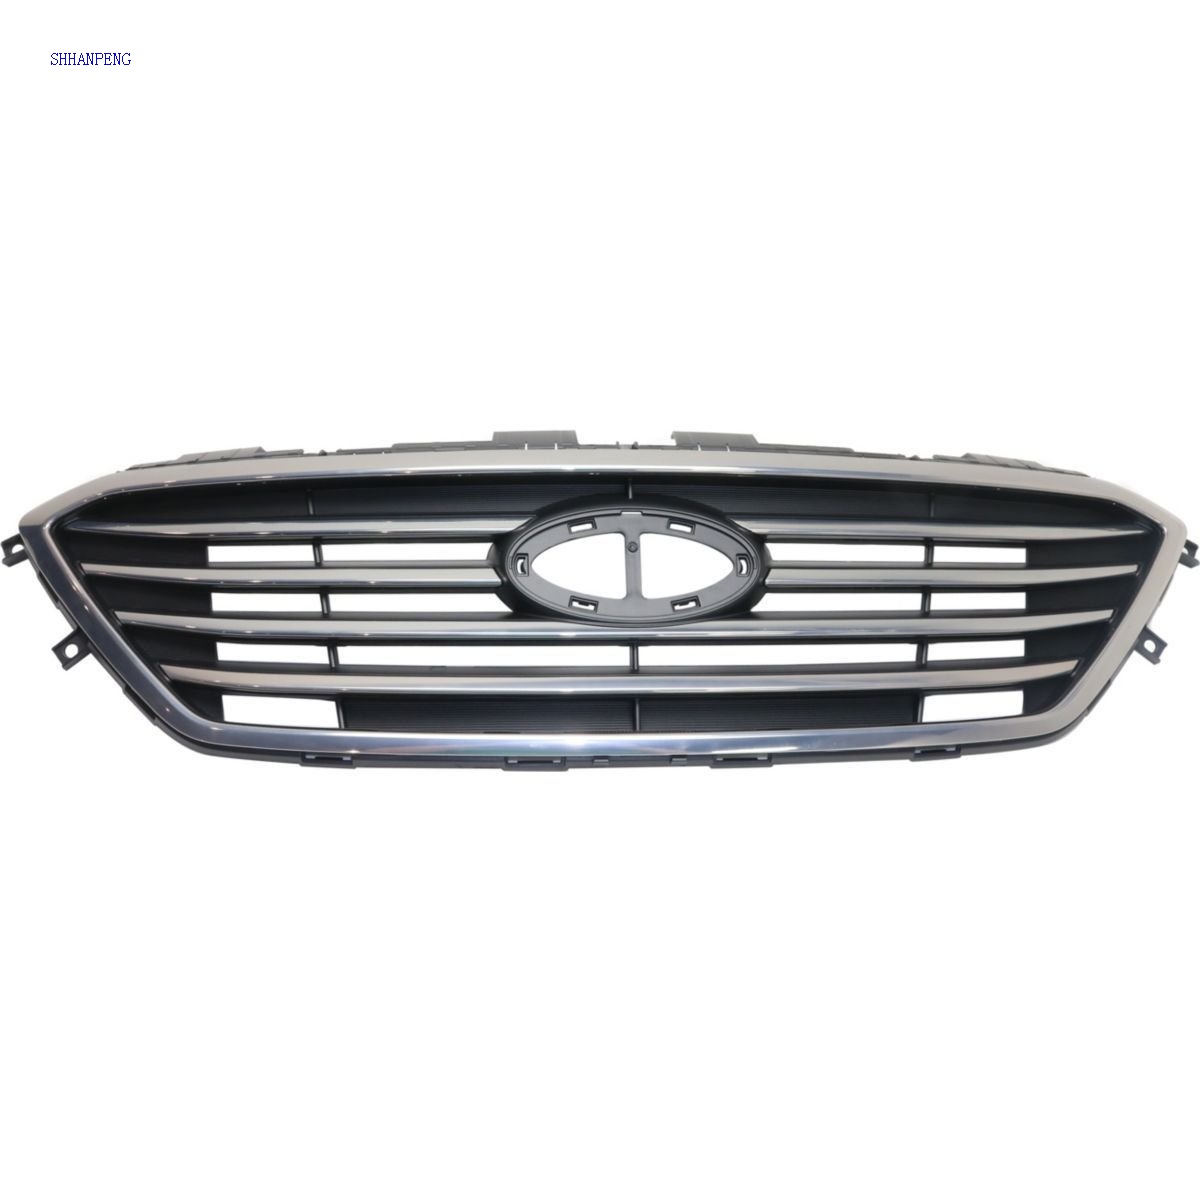 Grille Grill Front CHROME MOULDING With Black Insert For Hyundai